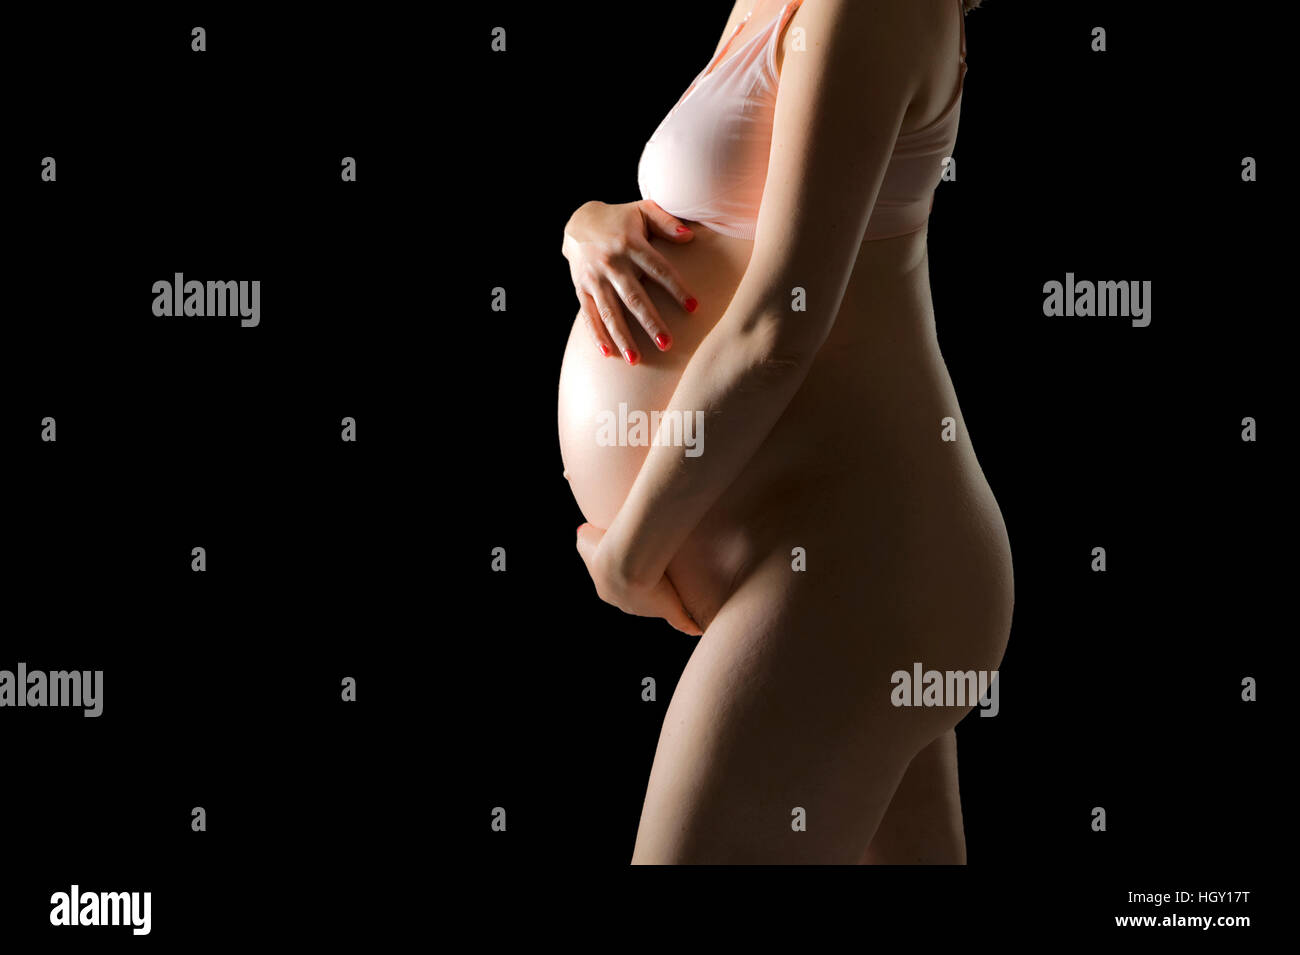 Pregnant woman is holding her belly Stock Photo